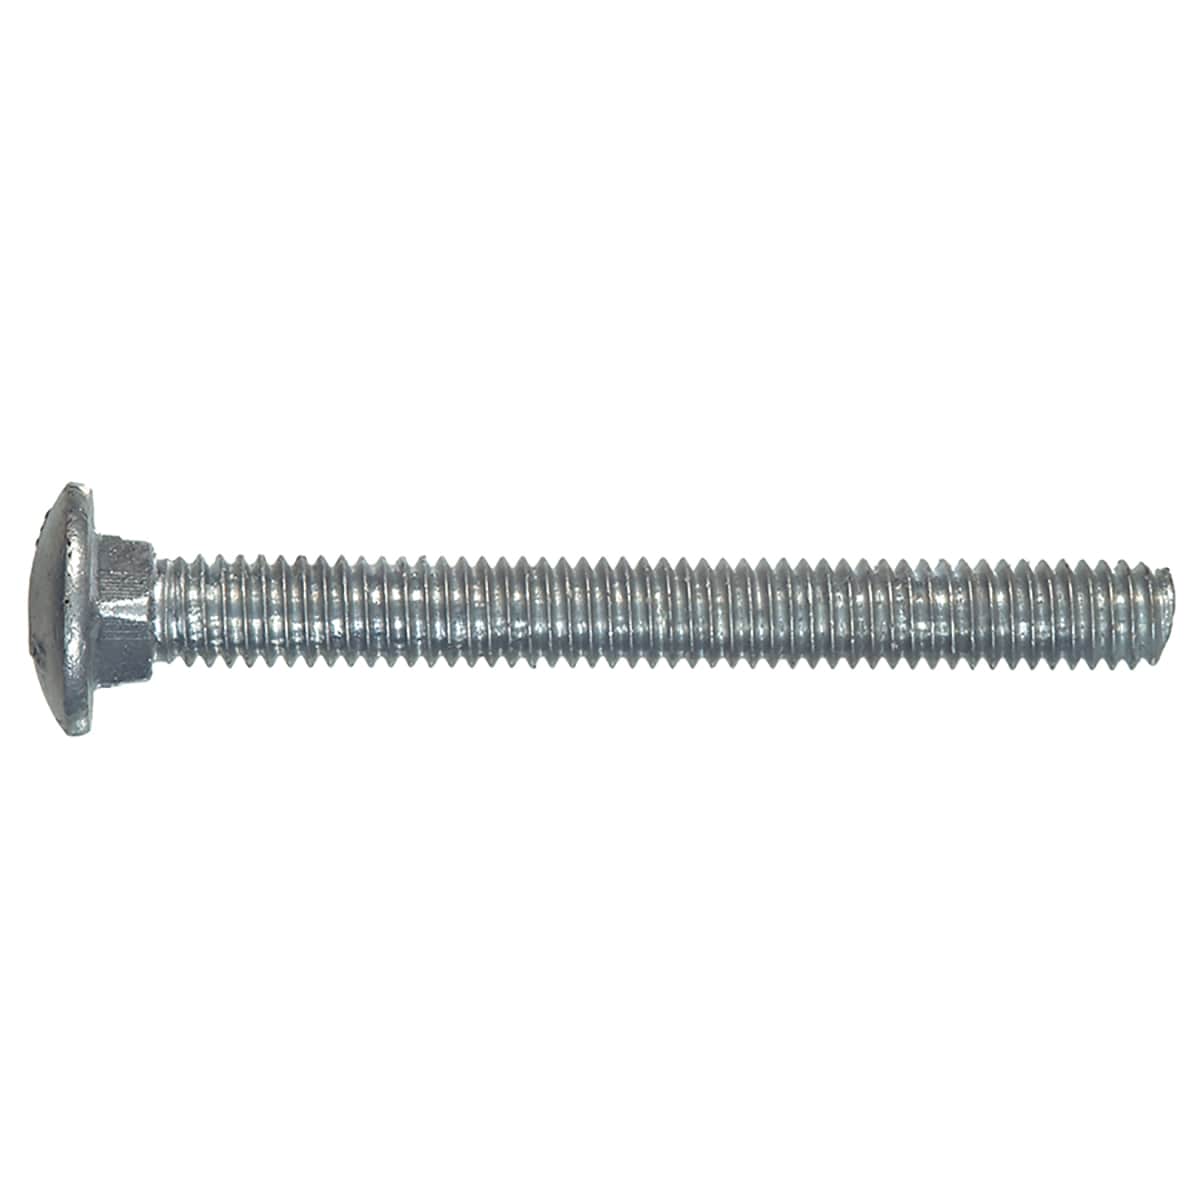 1/4-20 x 1 1/4 Carriage Bolts A307 Grade A COARSE HDG Inch Full Thread,Size: 1/4-20,Length: 1-1/4,Head: Round,Drive: External Square,Steel,Galvanized,Thread Type: UNC Quantity: 125